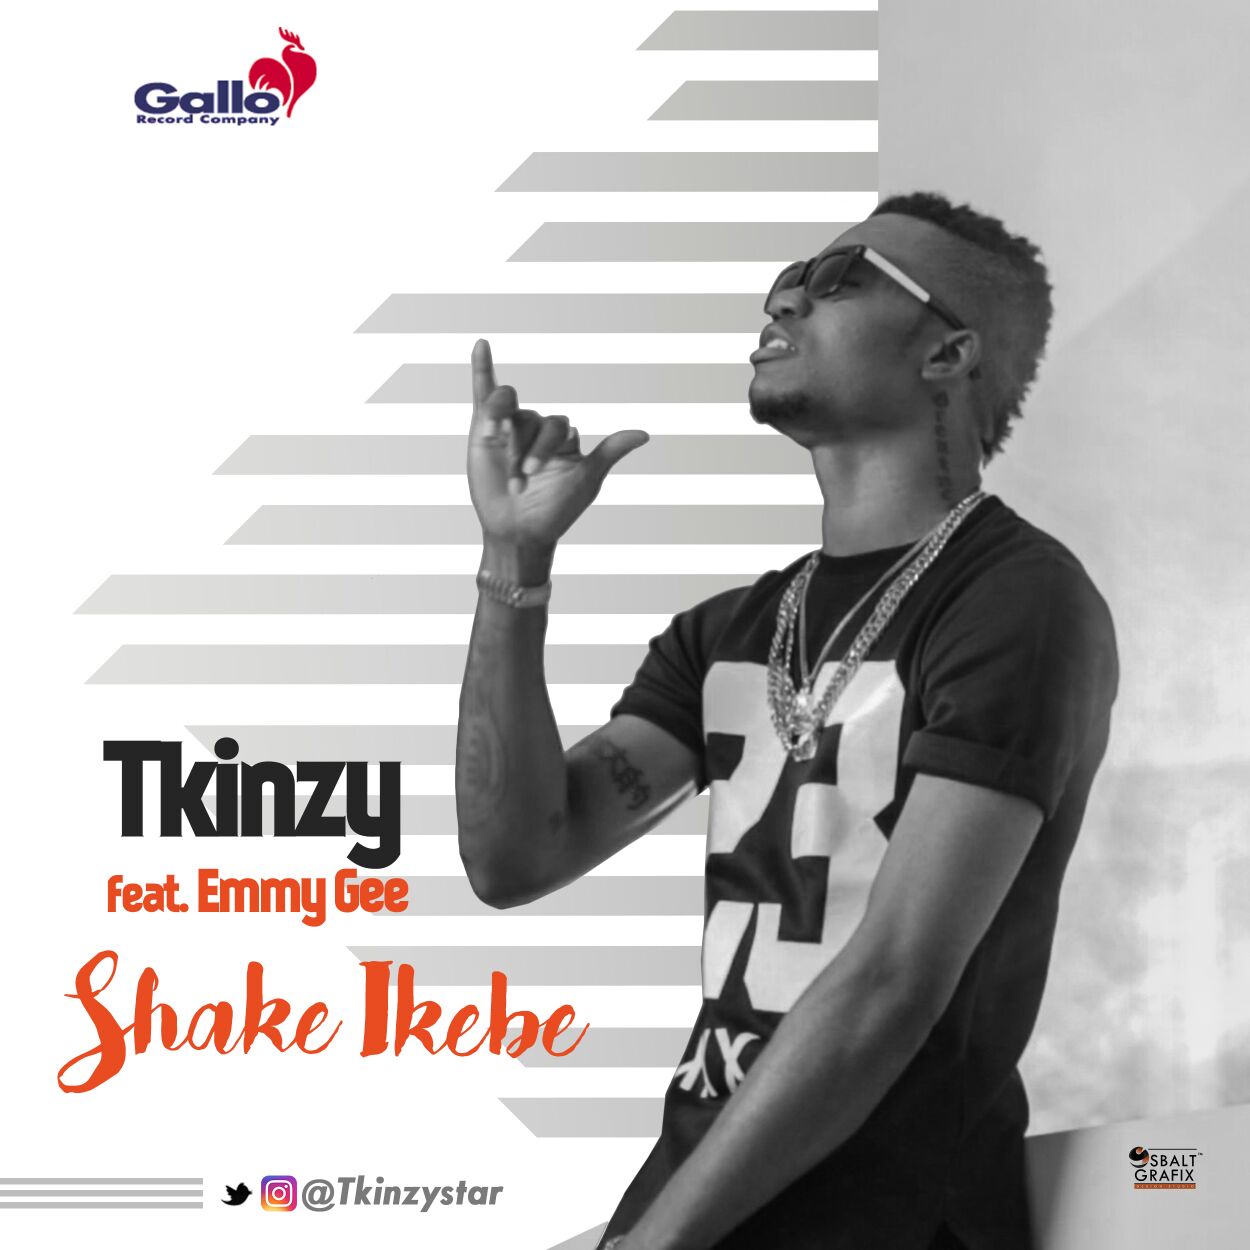 VIDEO: Tkinzy ft. Emmy Gee – Shake Ikebe